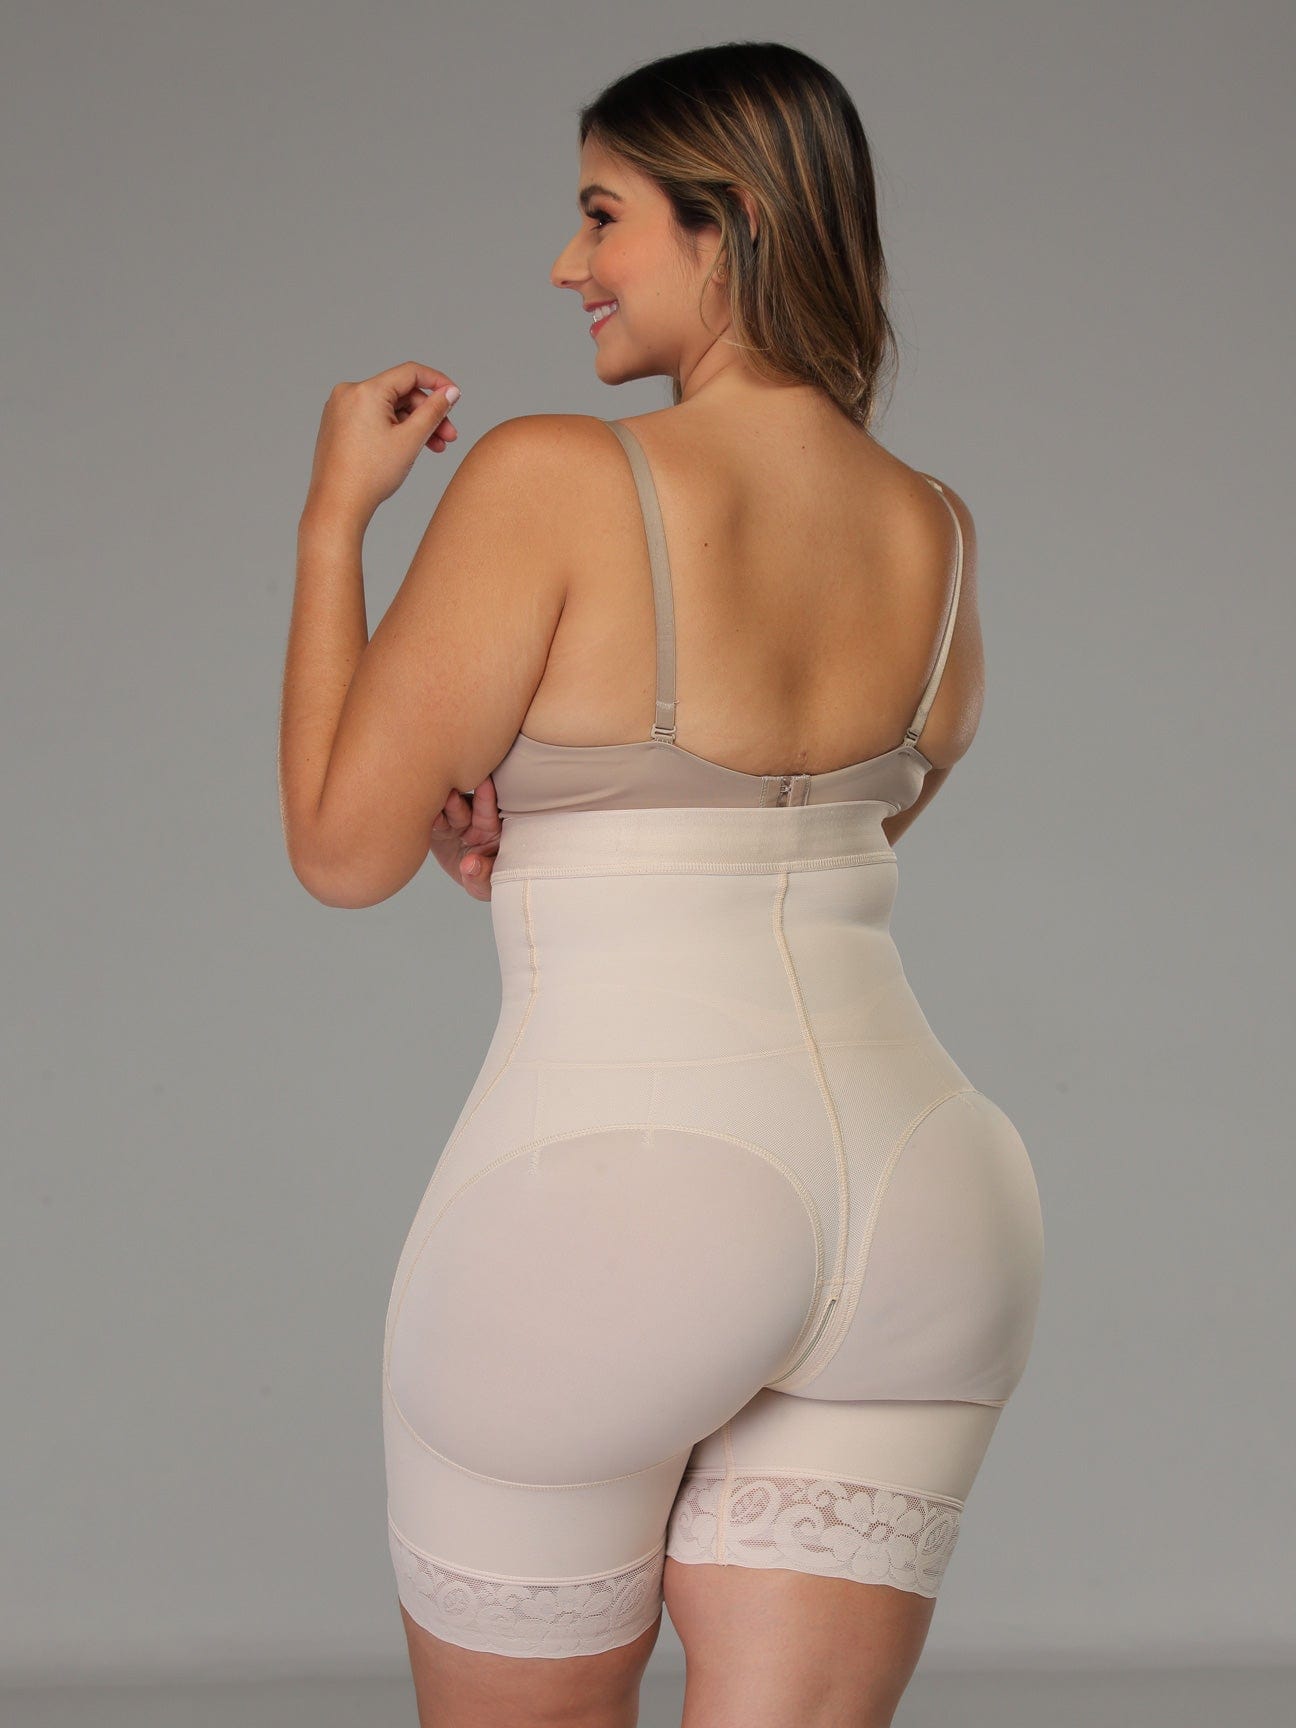 Strapless Powernet Hourglass Body Shaper with Butt Lift beige color back view plus sized model.